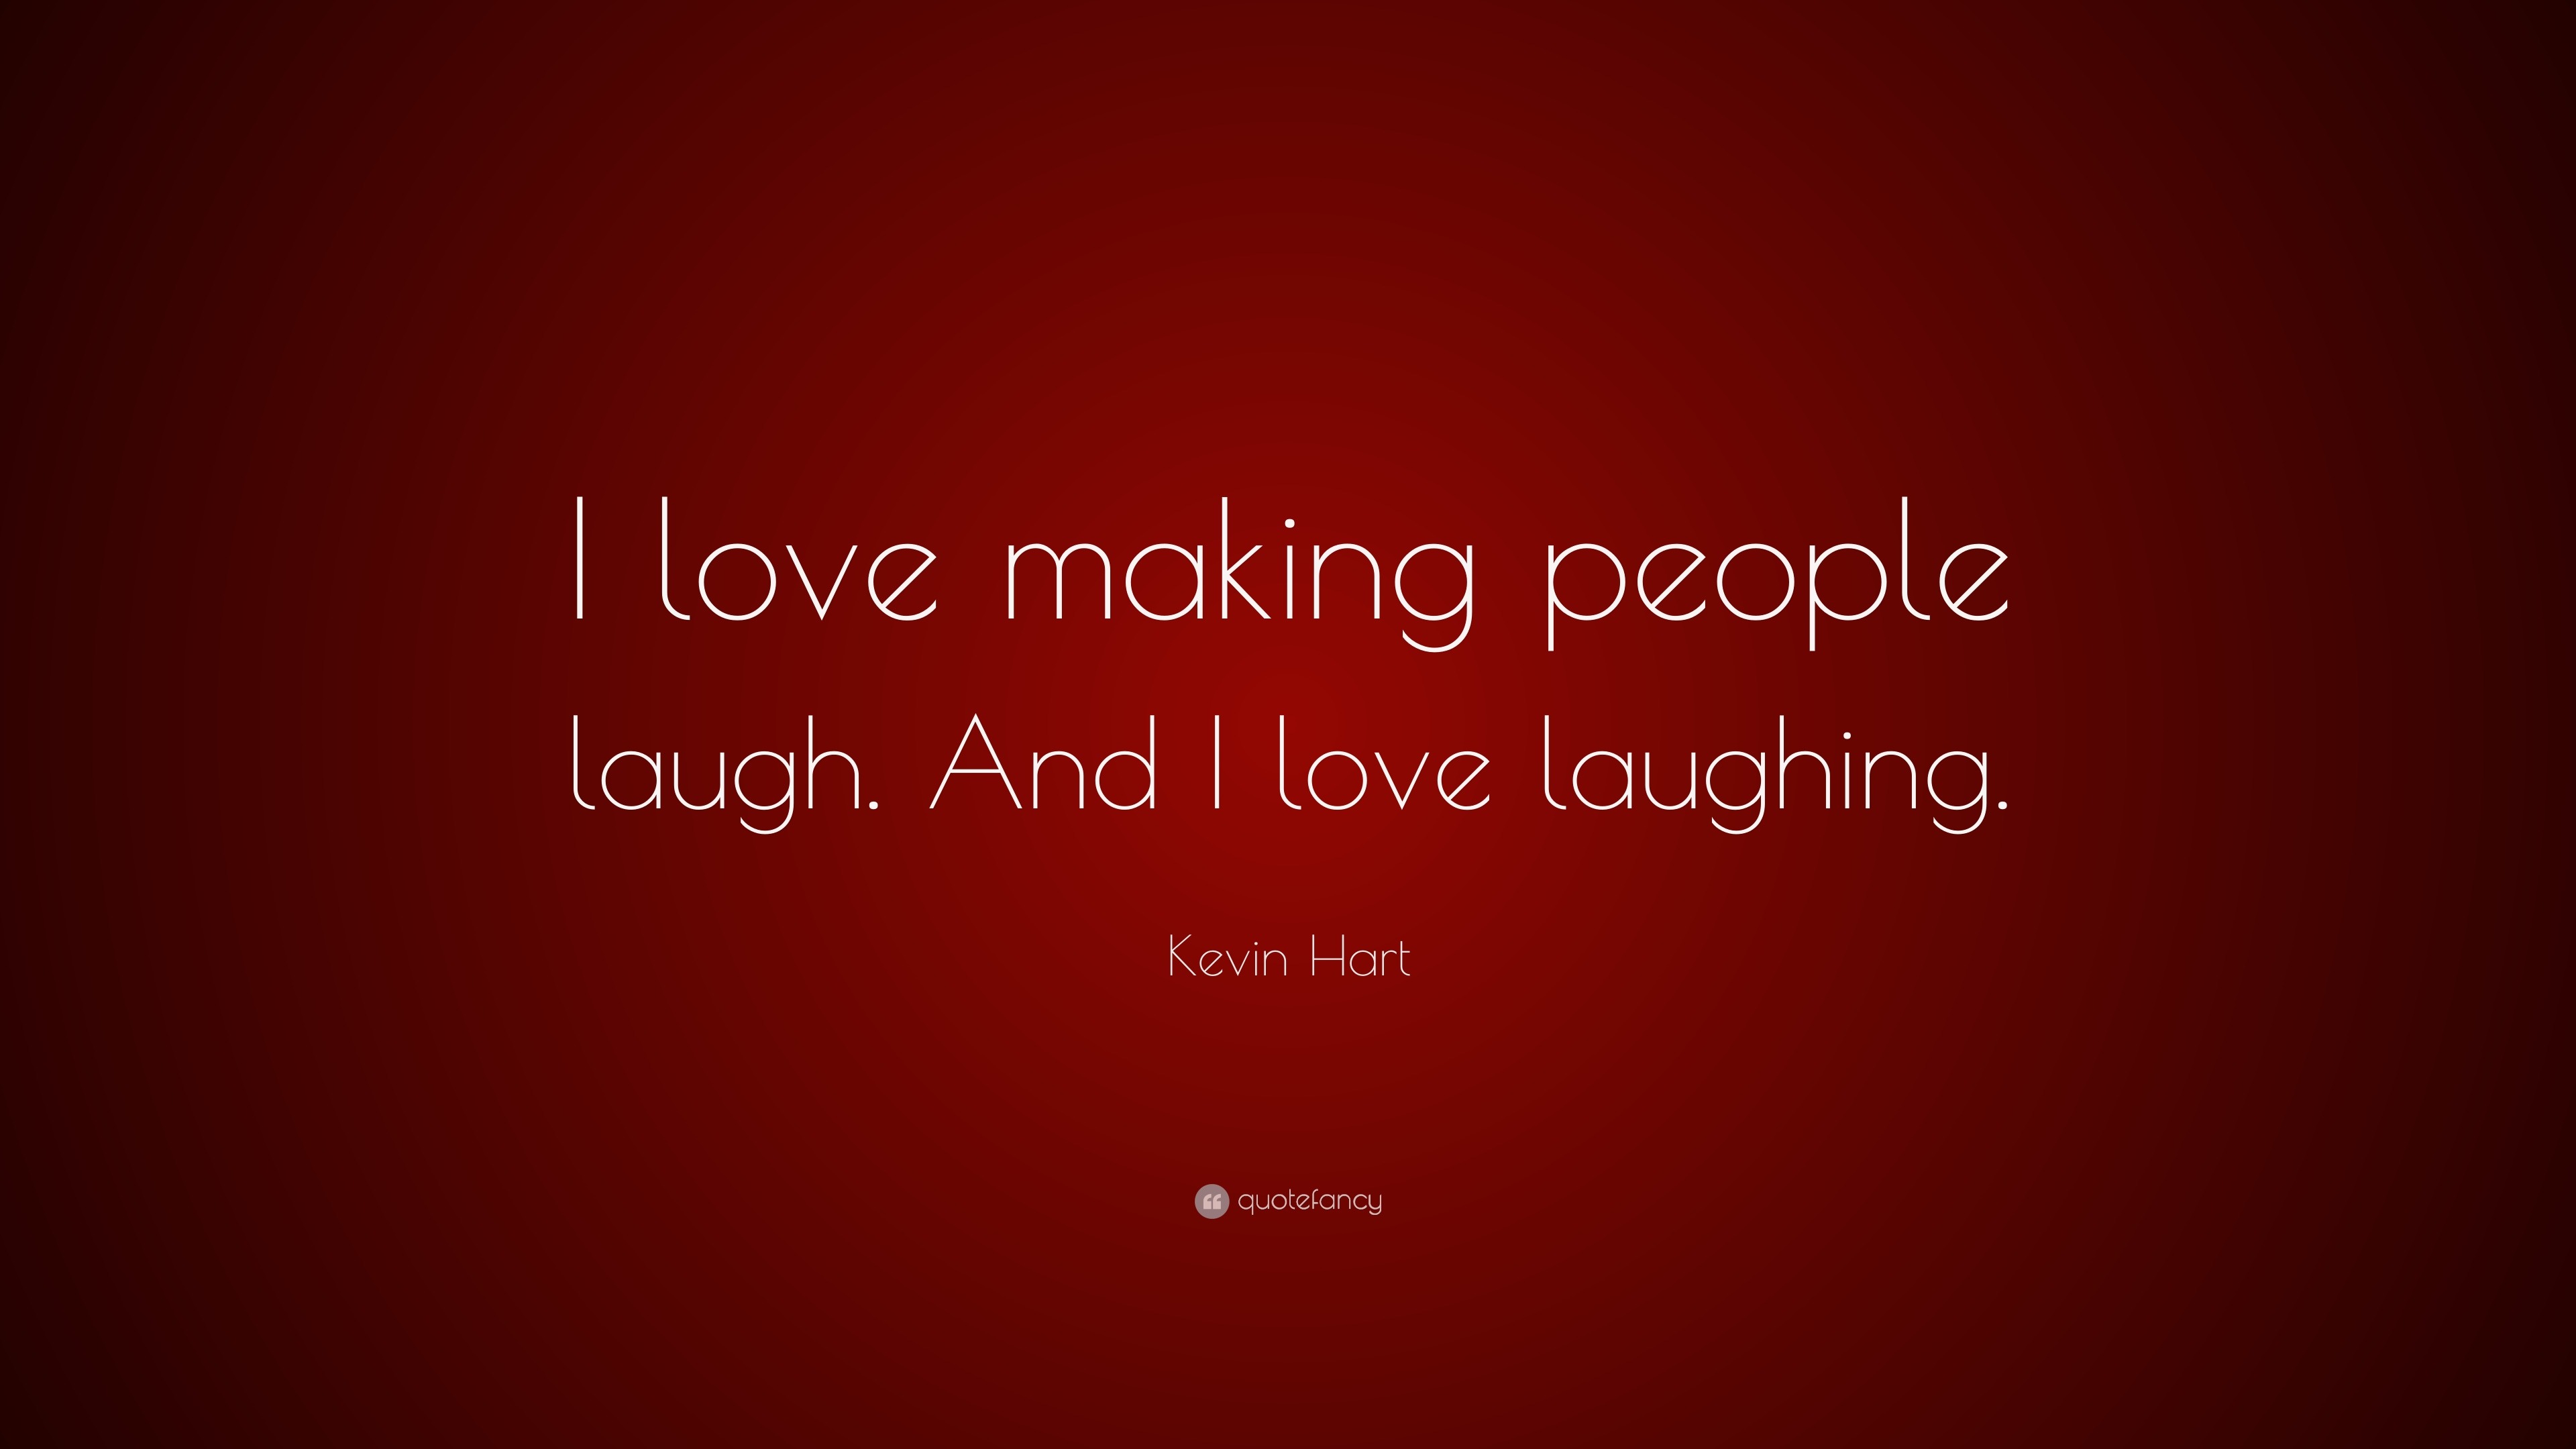 Kevin Hart Quote “I love making people laugh And I love laughing